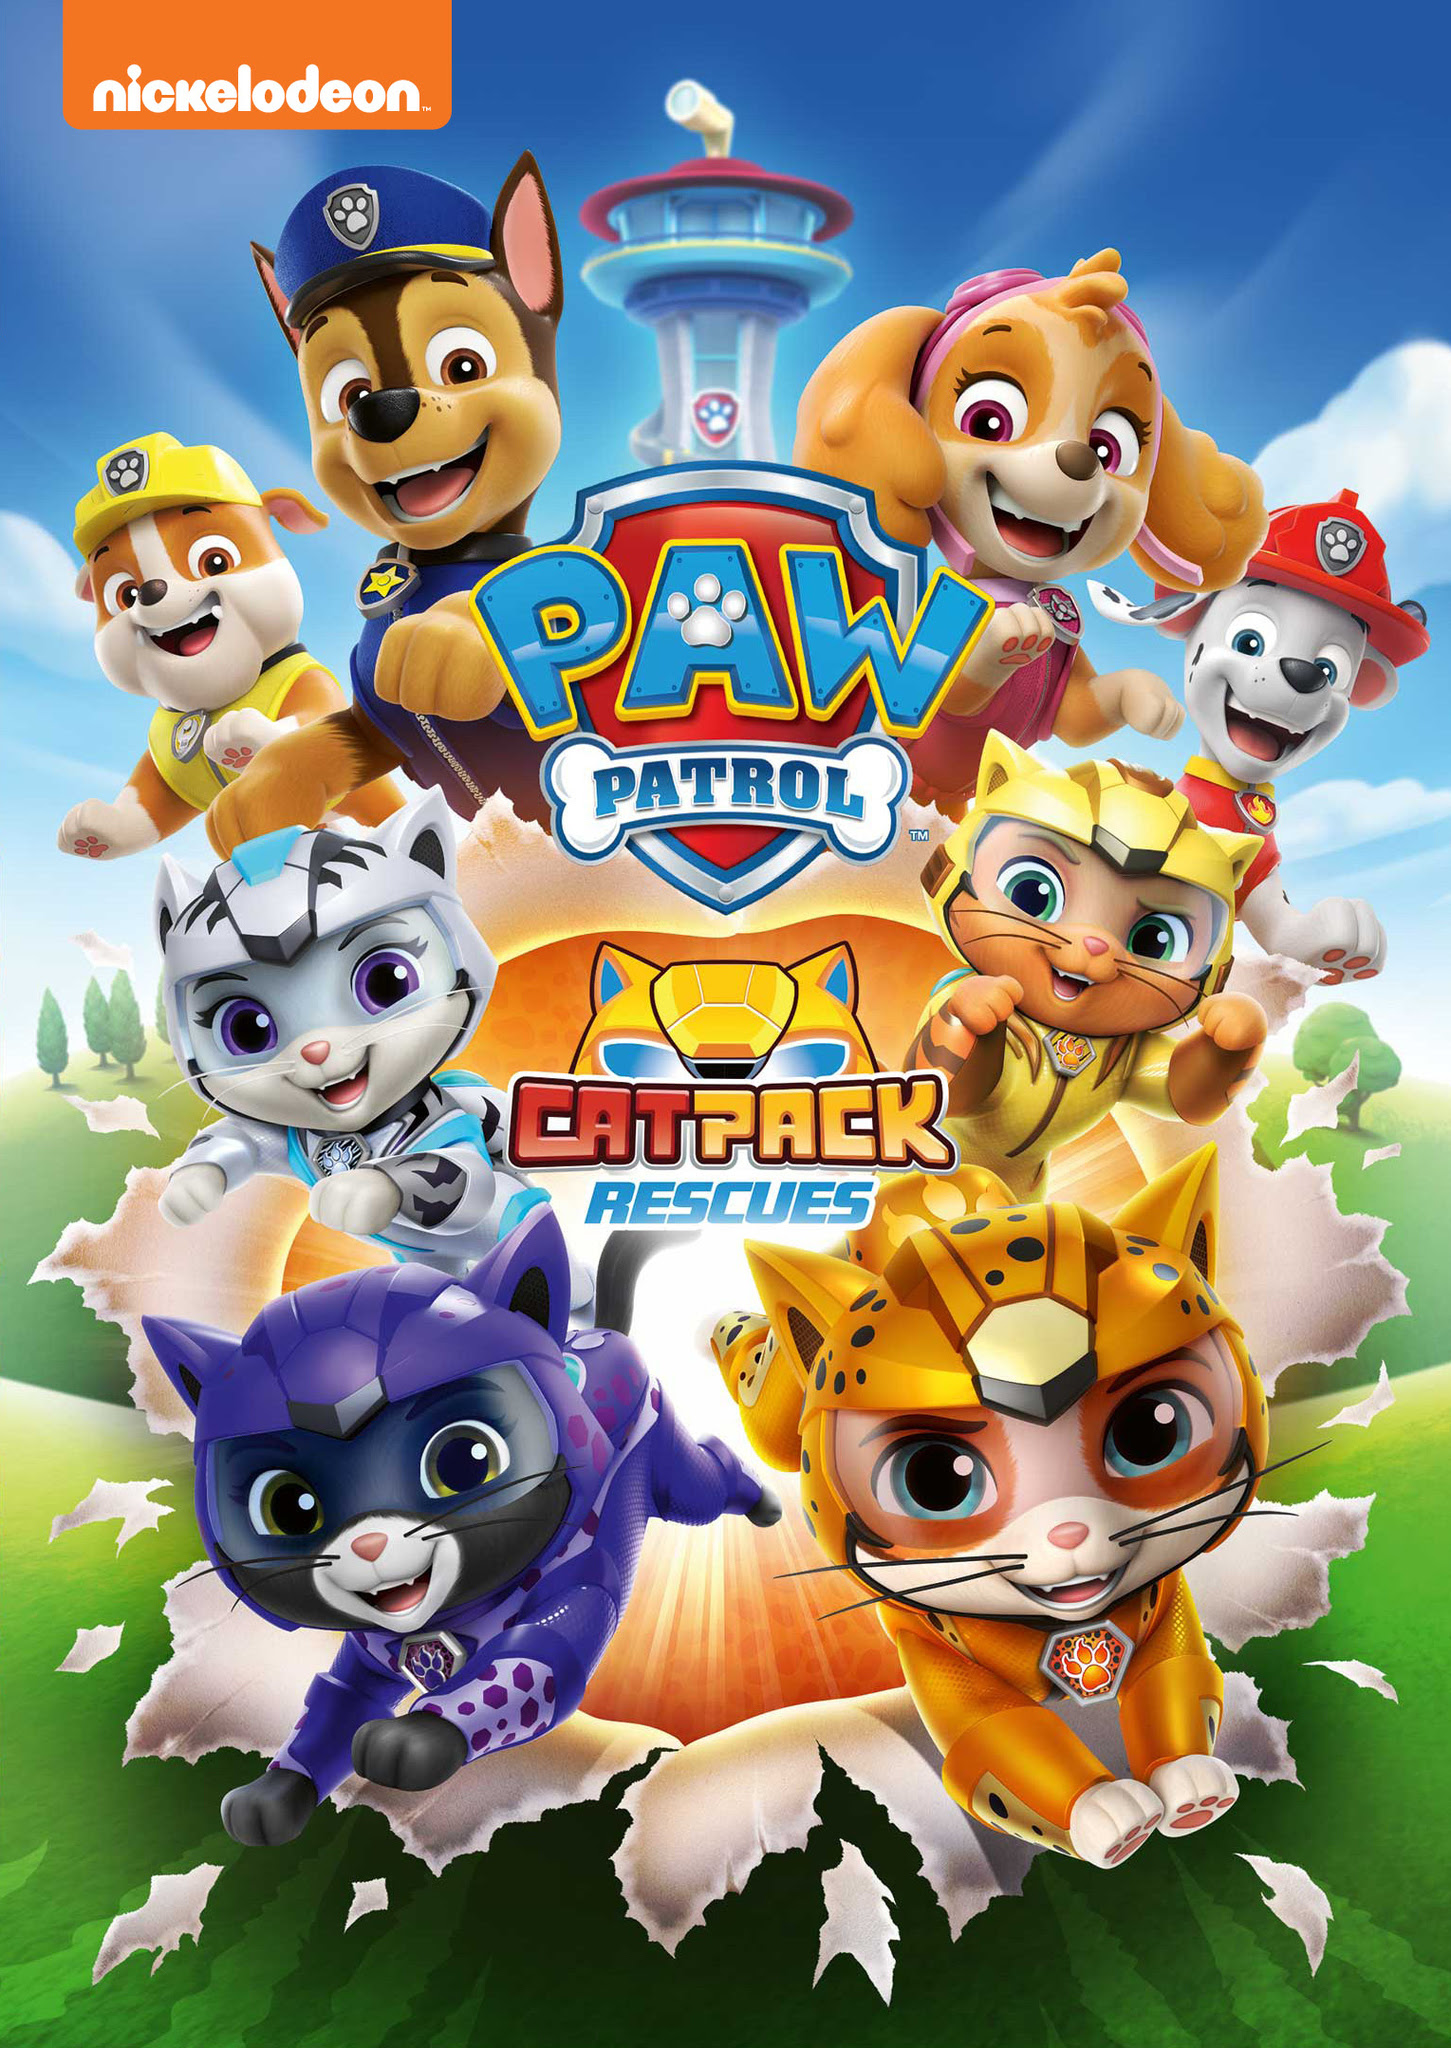 Globo Ánimo barrera PAW Patrol: Cat Pack Rescues! Giveaway